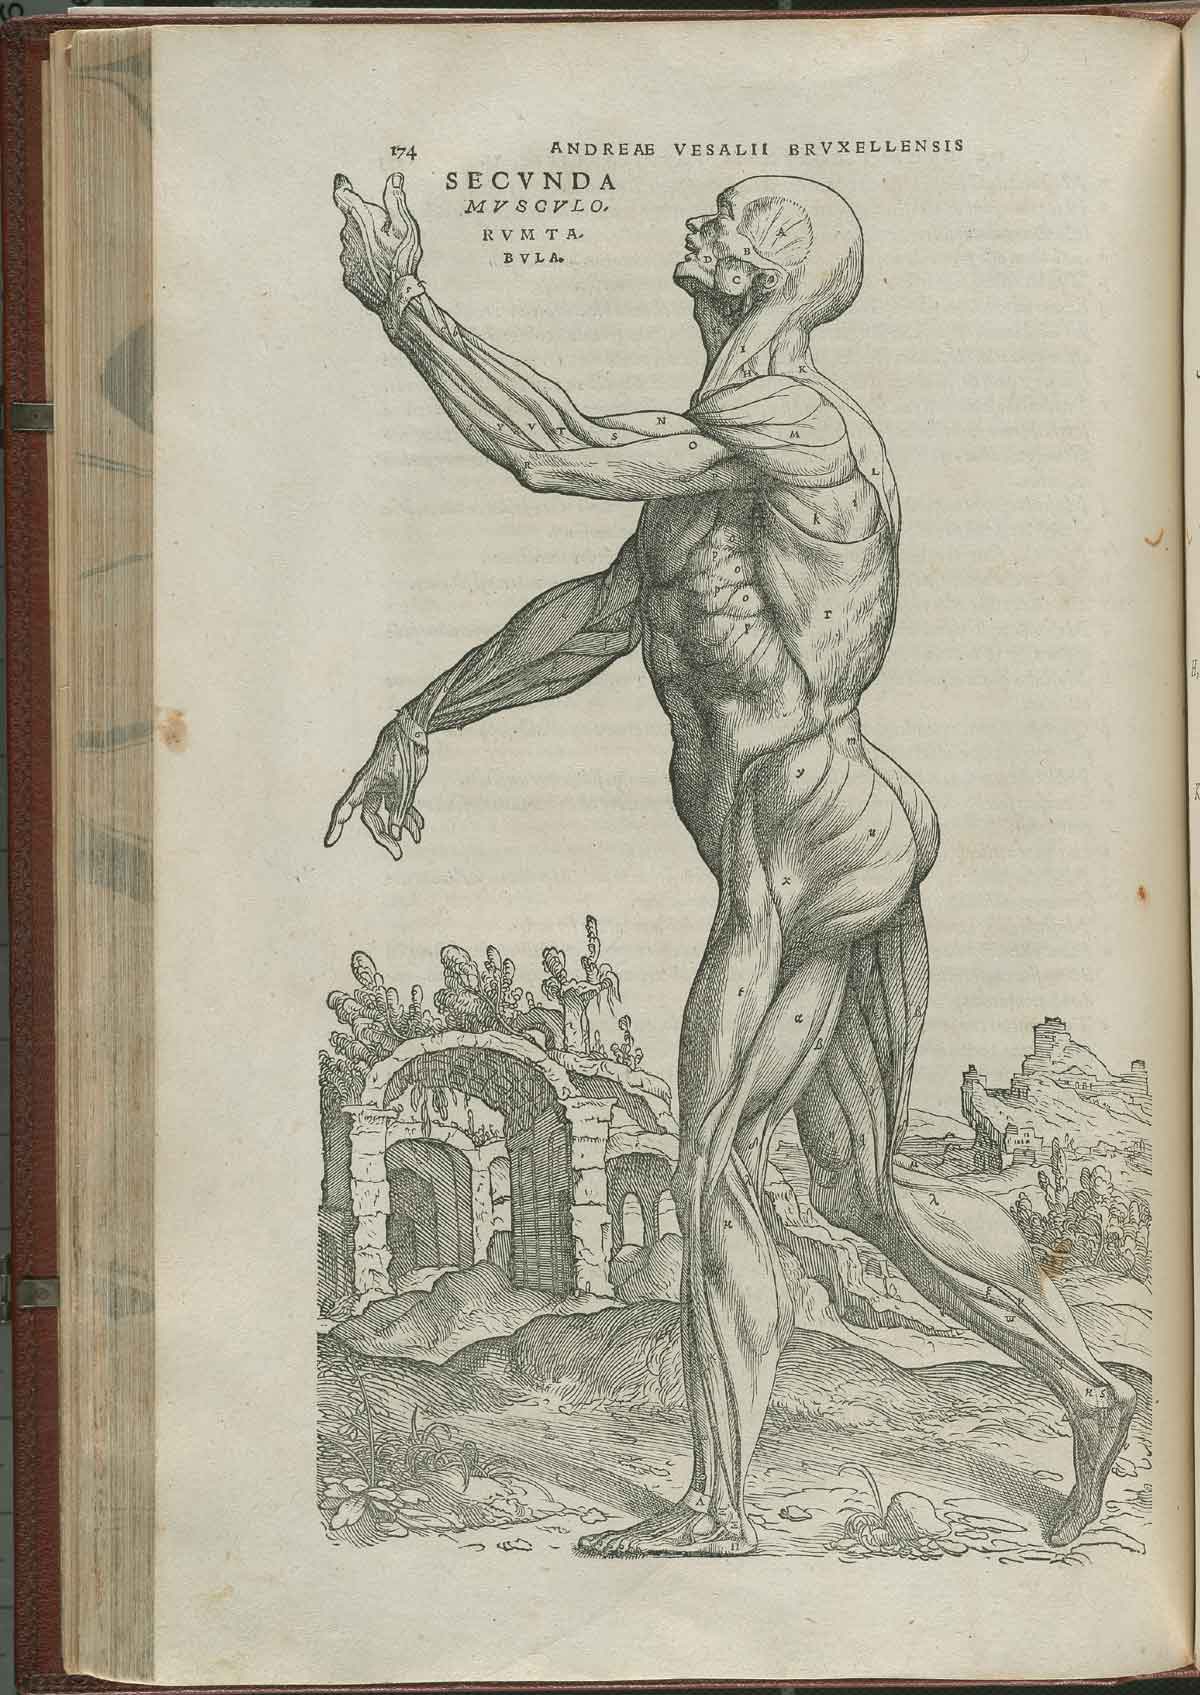 Page 174 of Andreas Vesalius' De corporis humani fabrica libri septem, featuring the illustrated woodcut of the first muscle plate, a full-length flayed corpse from the left side view walking with its left arm extended upwards and the right arm extended in front of it.